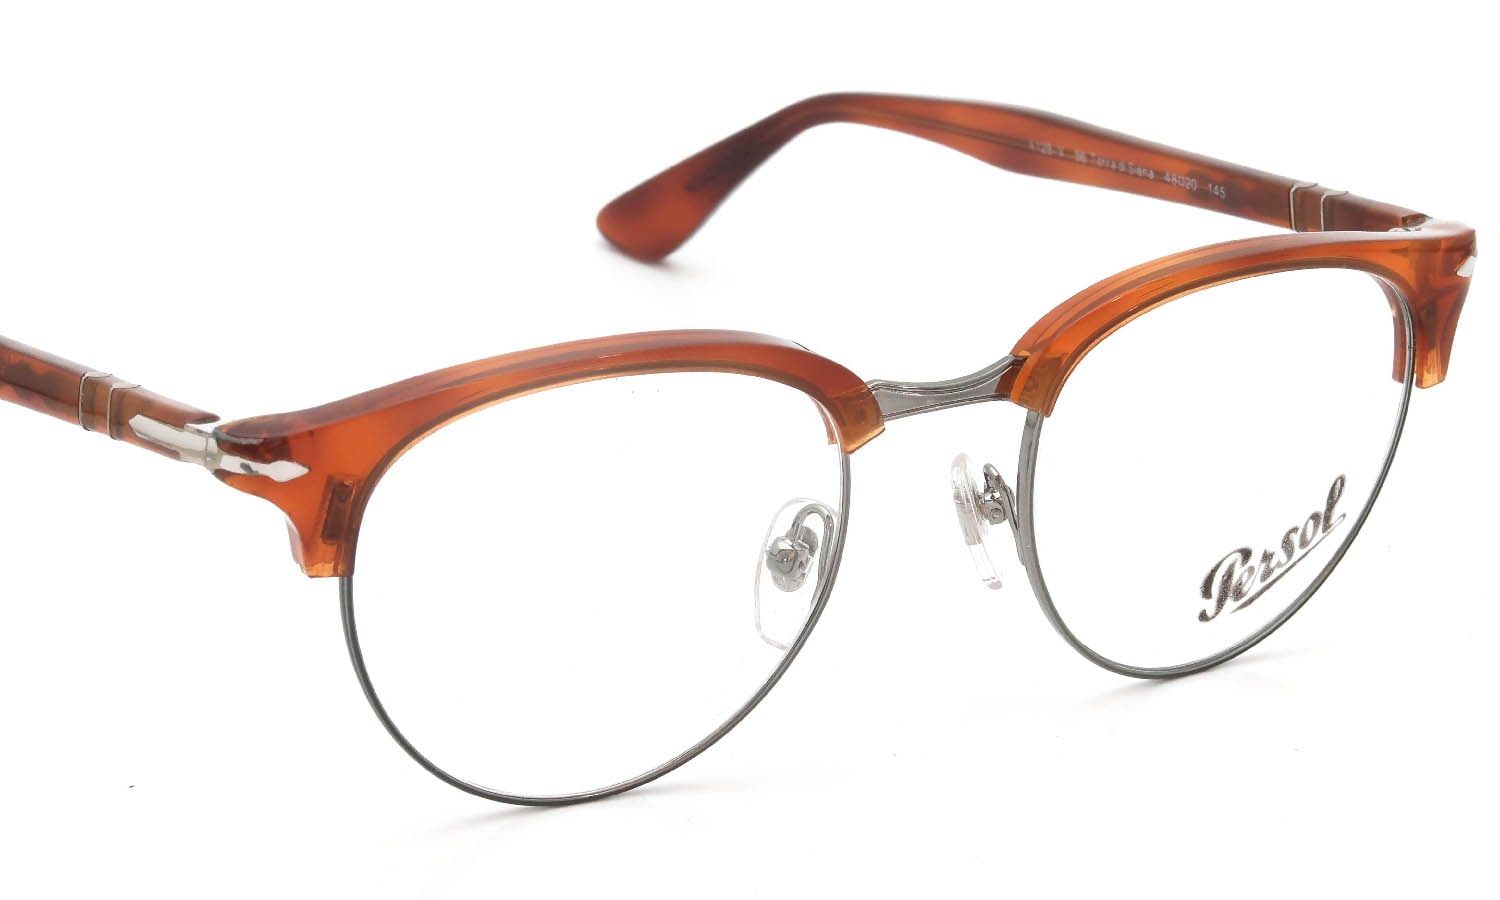 Persol 8129-V 96 48size